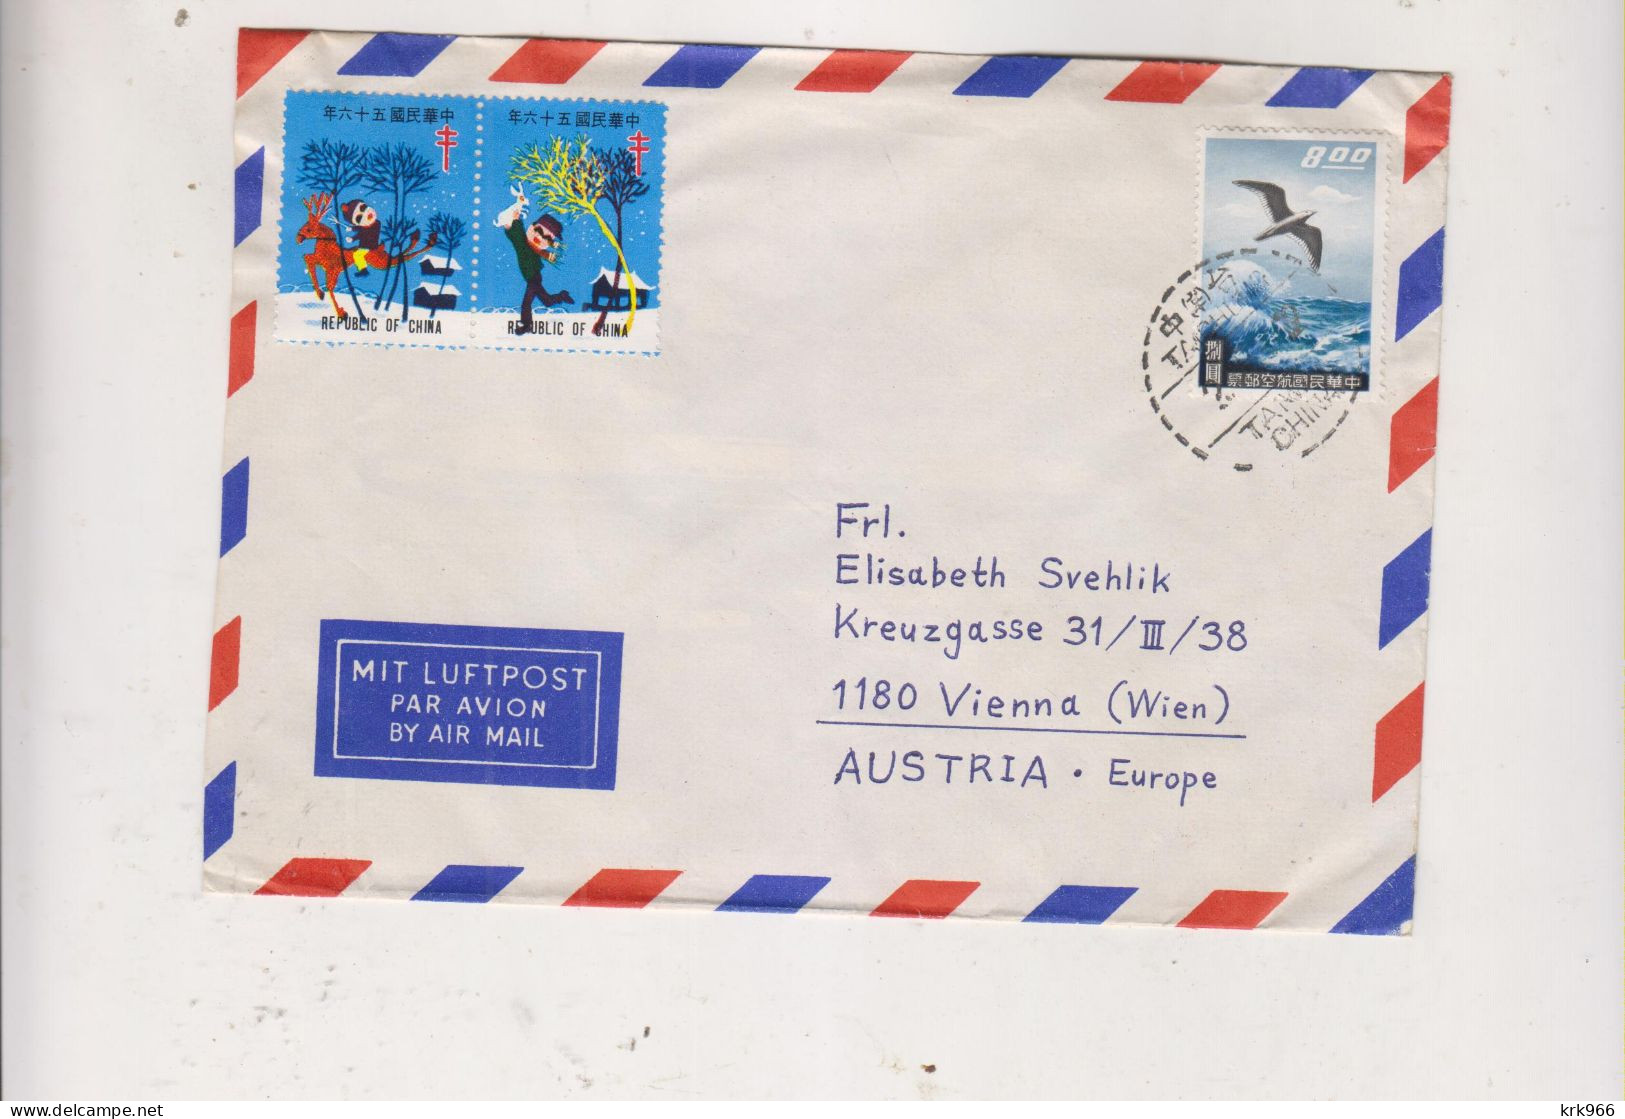 TAIWAN  Airmail Cover To Austria - Luftpost